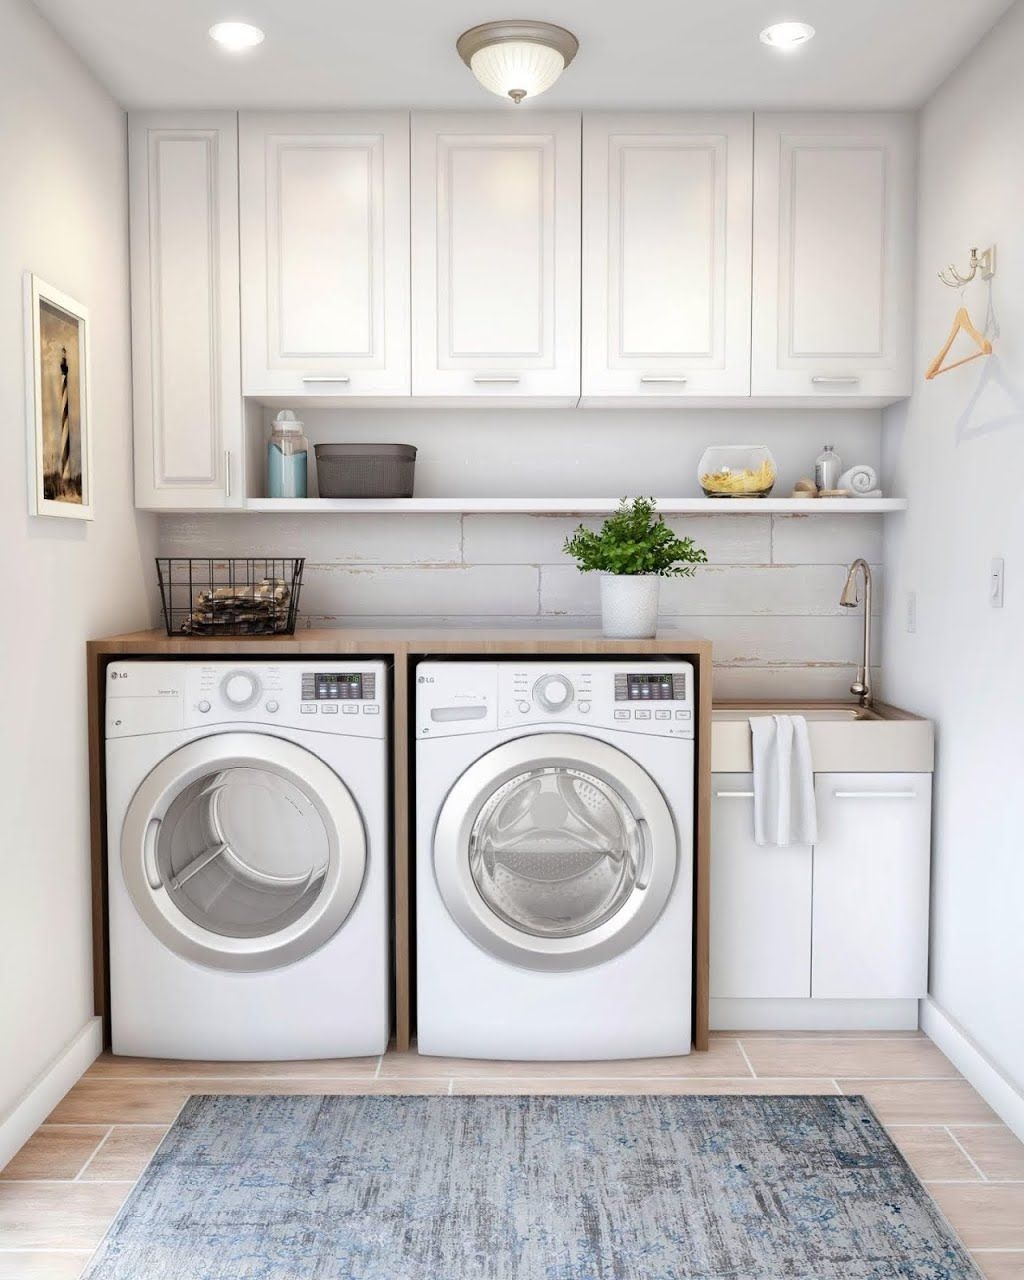 Inspiring Laundry Room Design With French Country Style 04